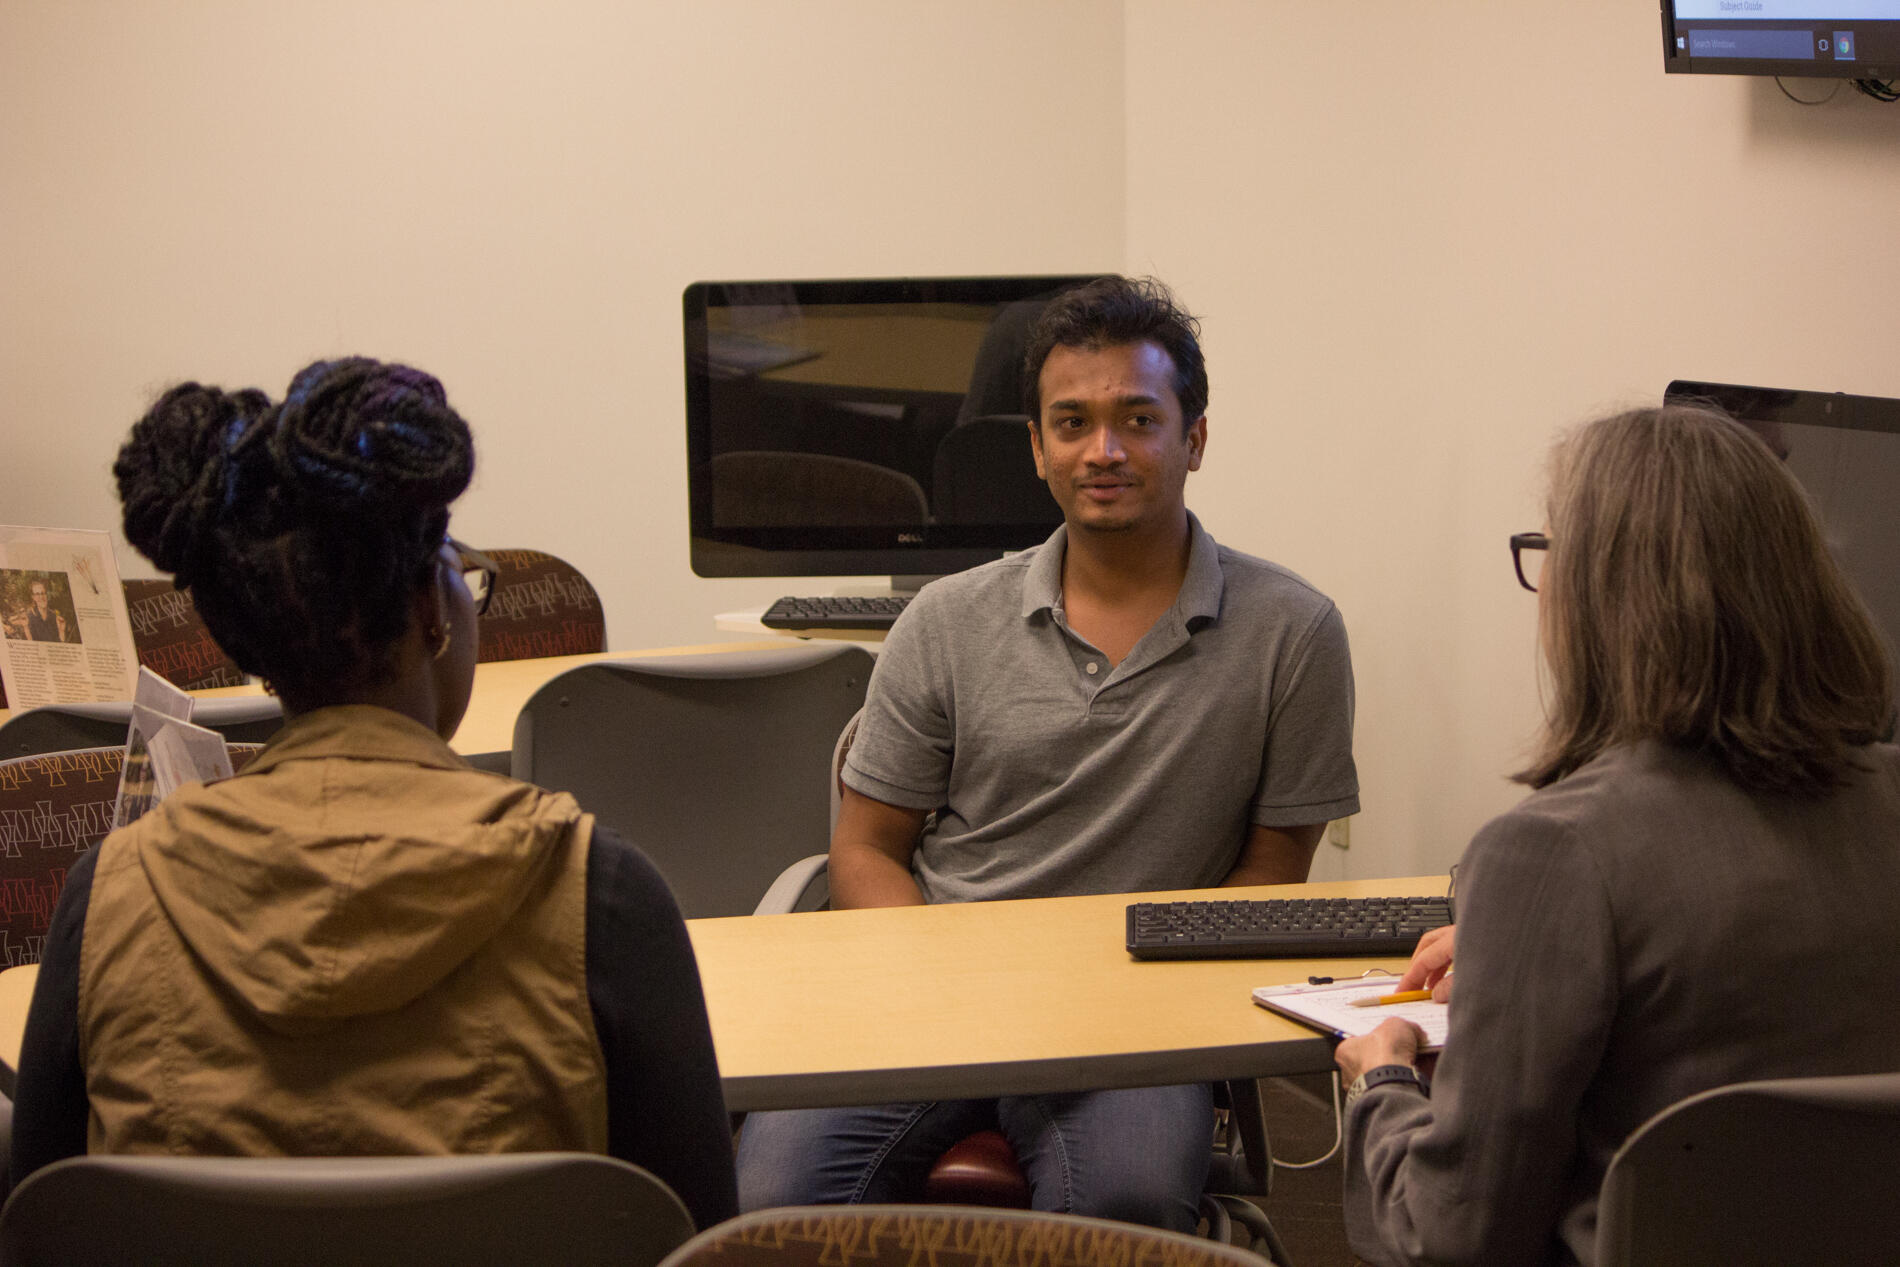 Students taking this fall's new Science Journalism course at VCU interviewed graduate students about their research at a recent workshop at Cabell Library.